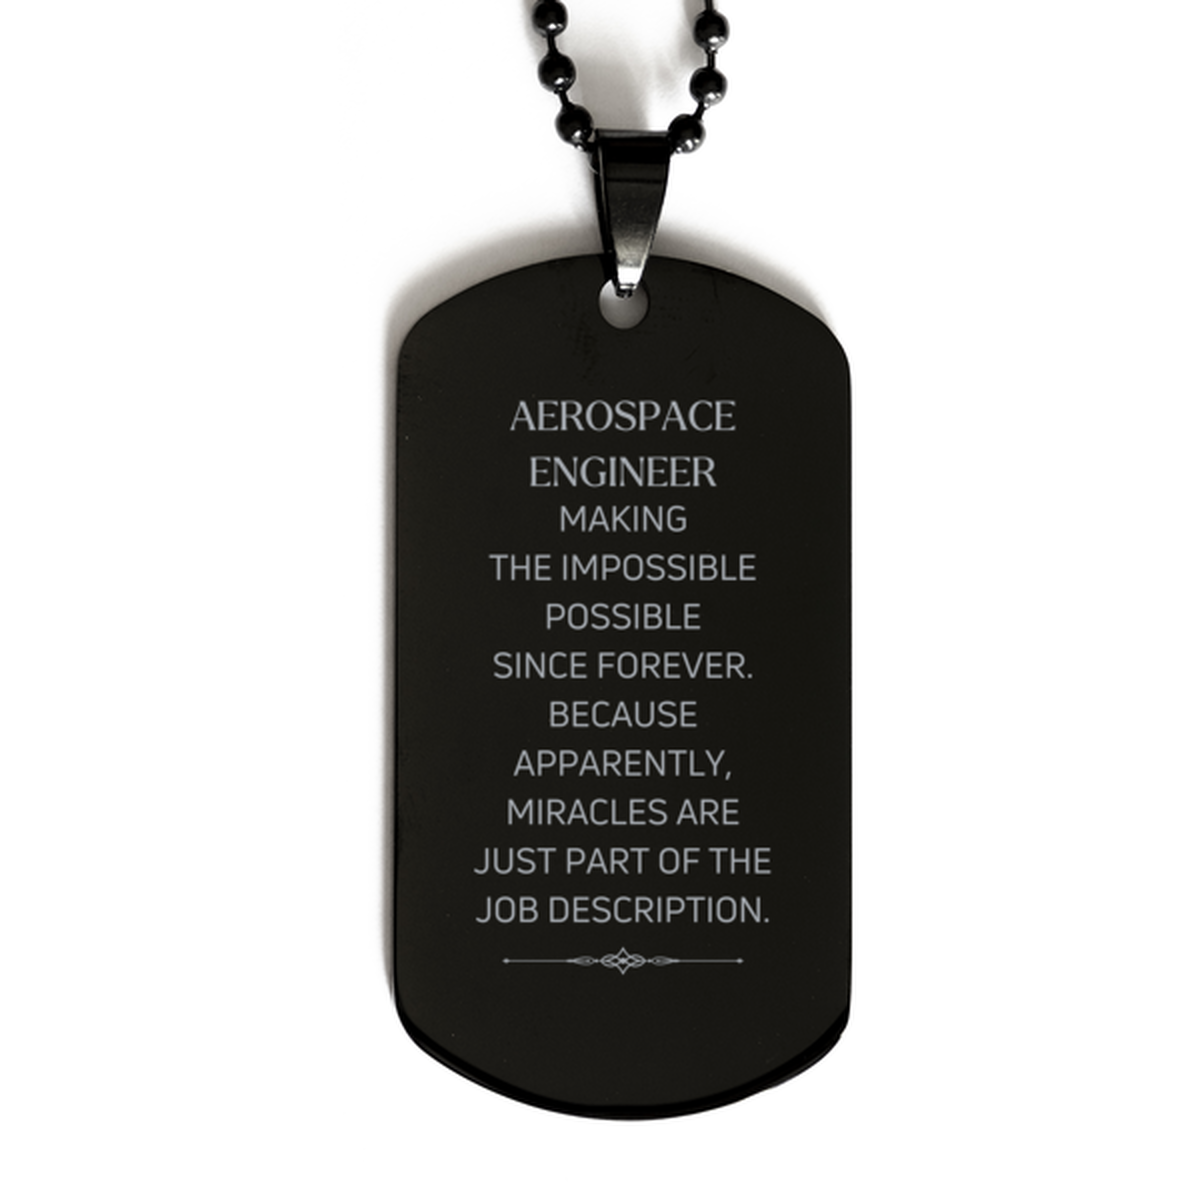 Funny Aerospace Engineer Gifts, Miracles are just part of the job description, Inspirational Birthday Black Dog Tag For Aerospace Engineer, Men, Women, Coworkers, Friends, Boss